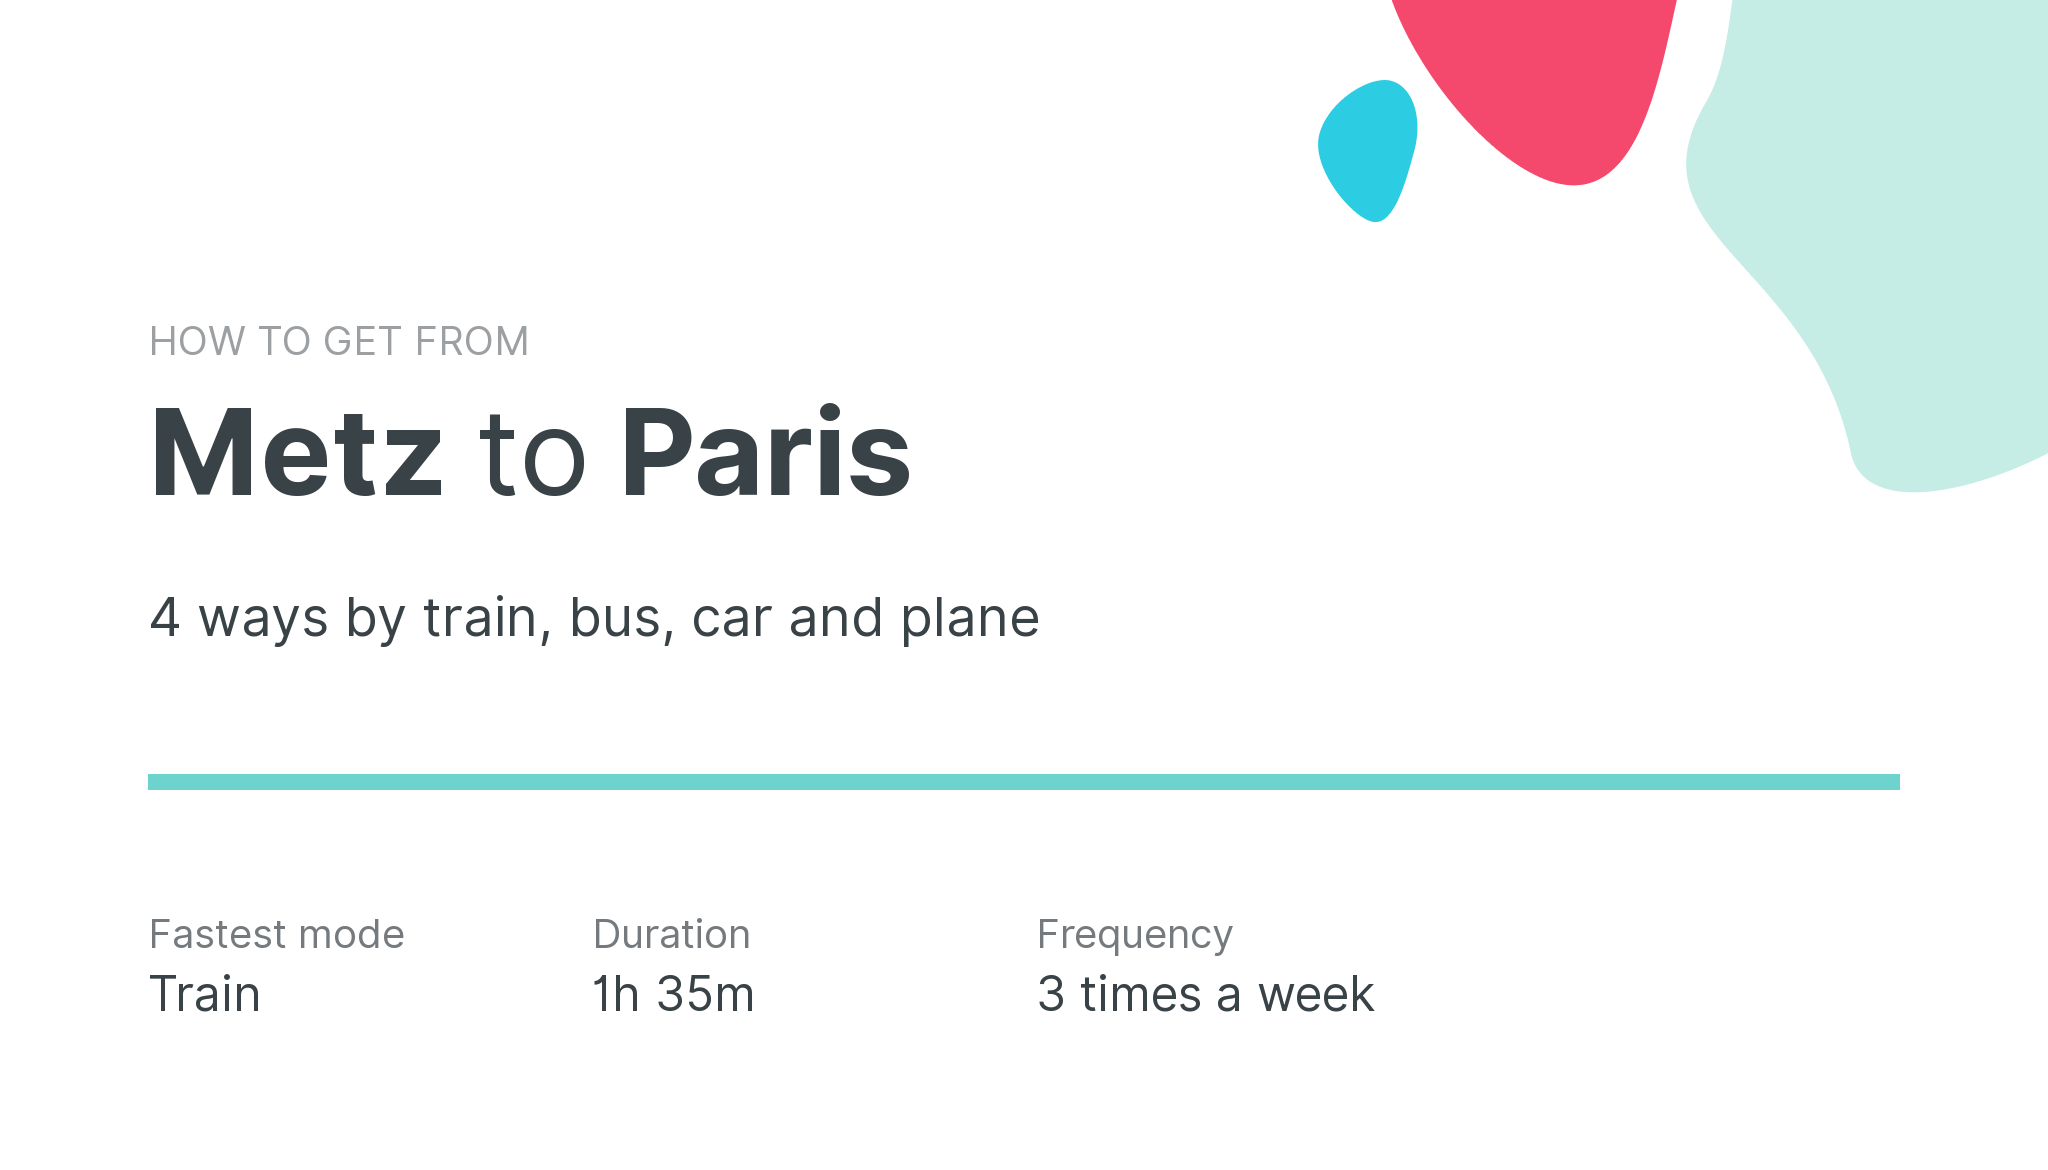 How do I get from Metz to Paris